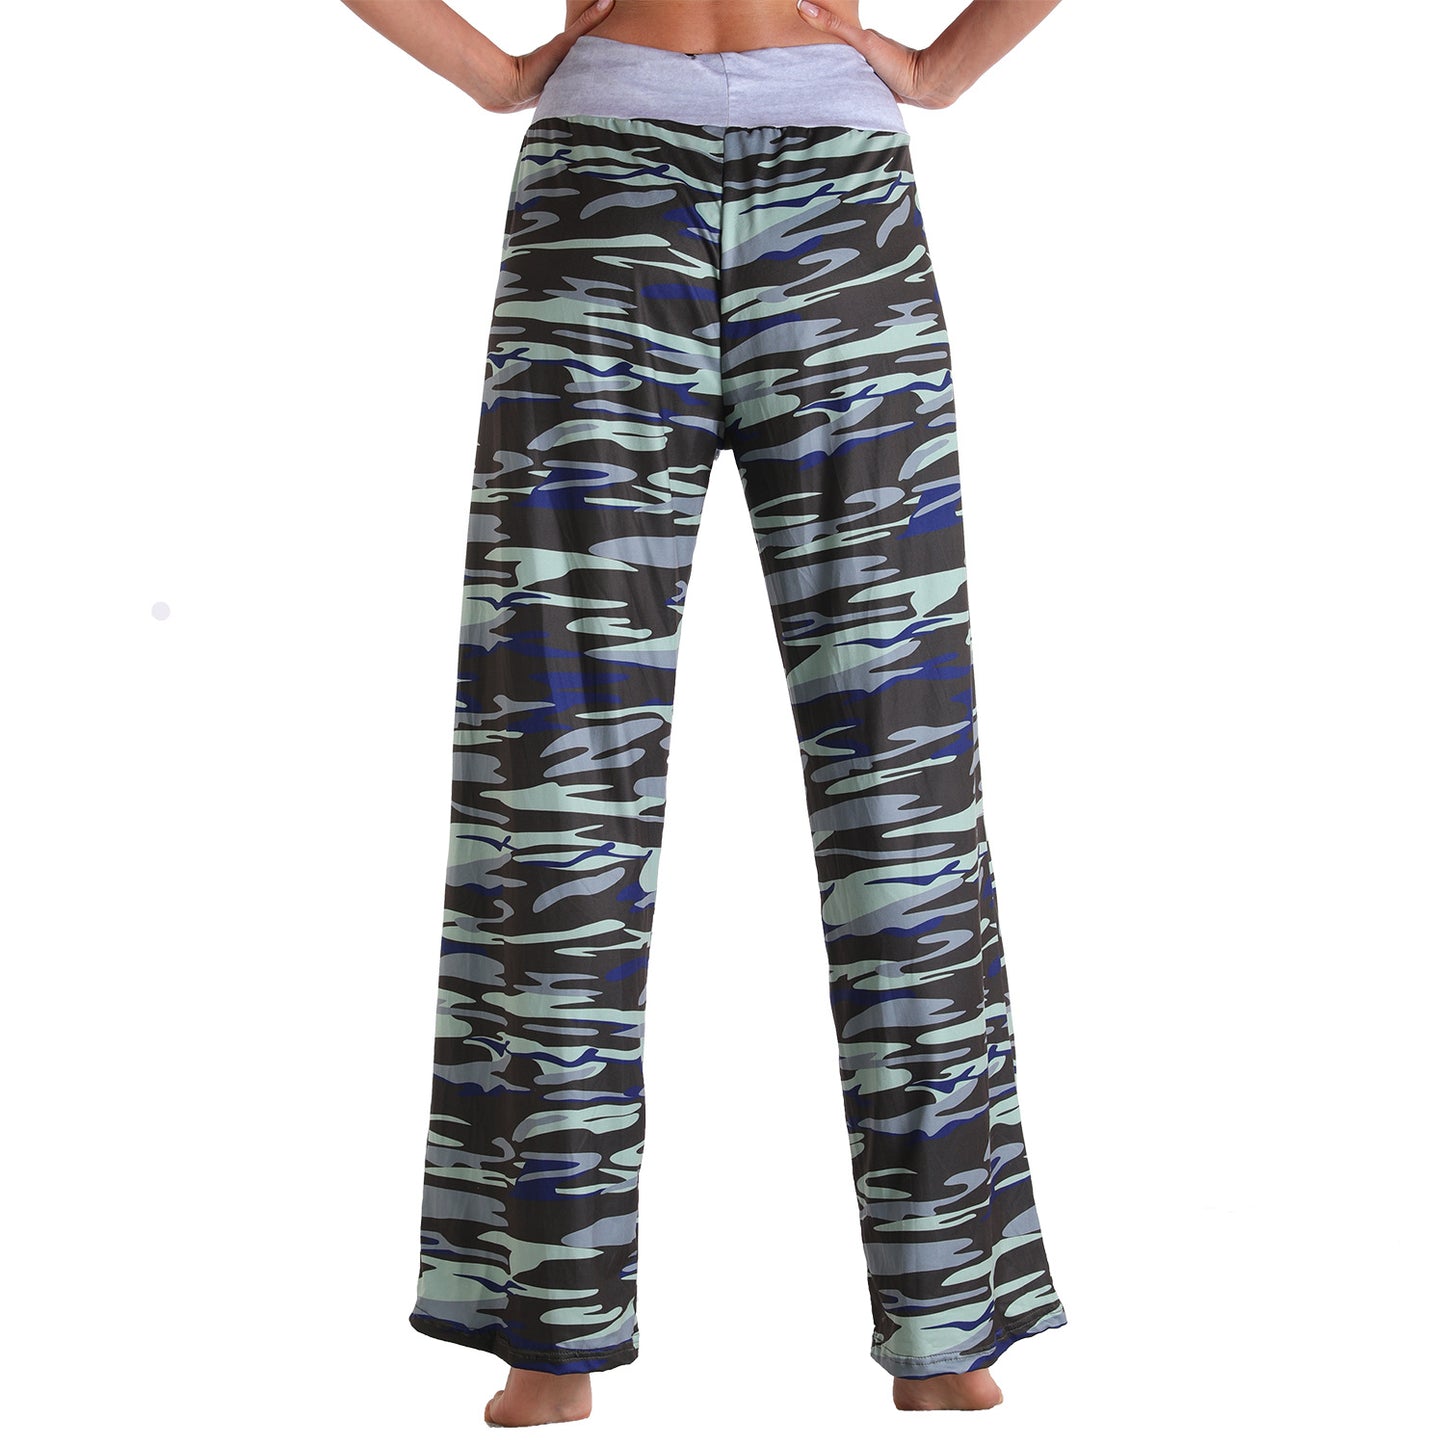 Casual Floral Print Women High Waist Trousers-Pajamas-Free Shipping at meselling99